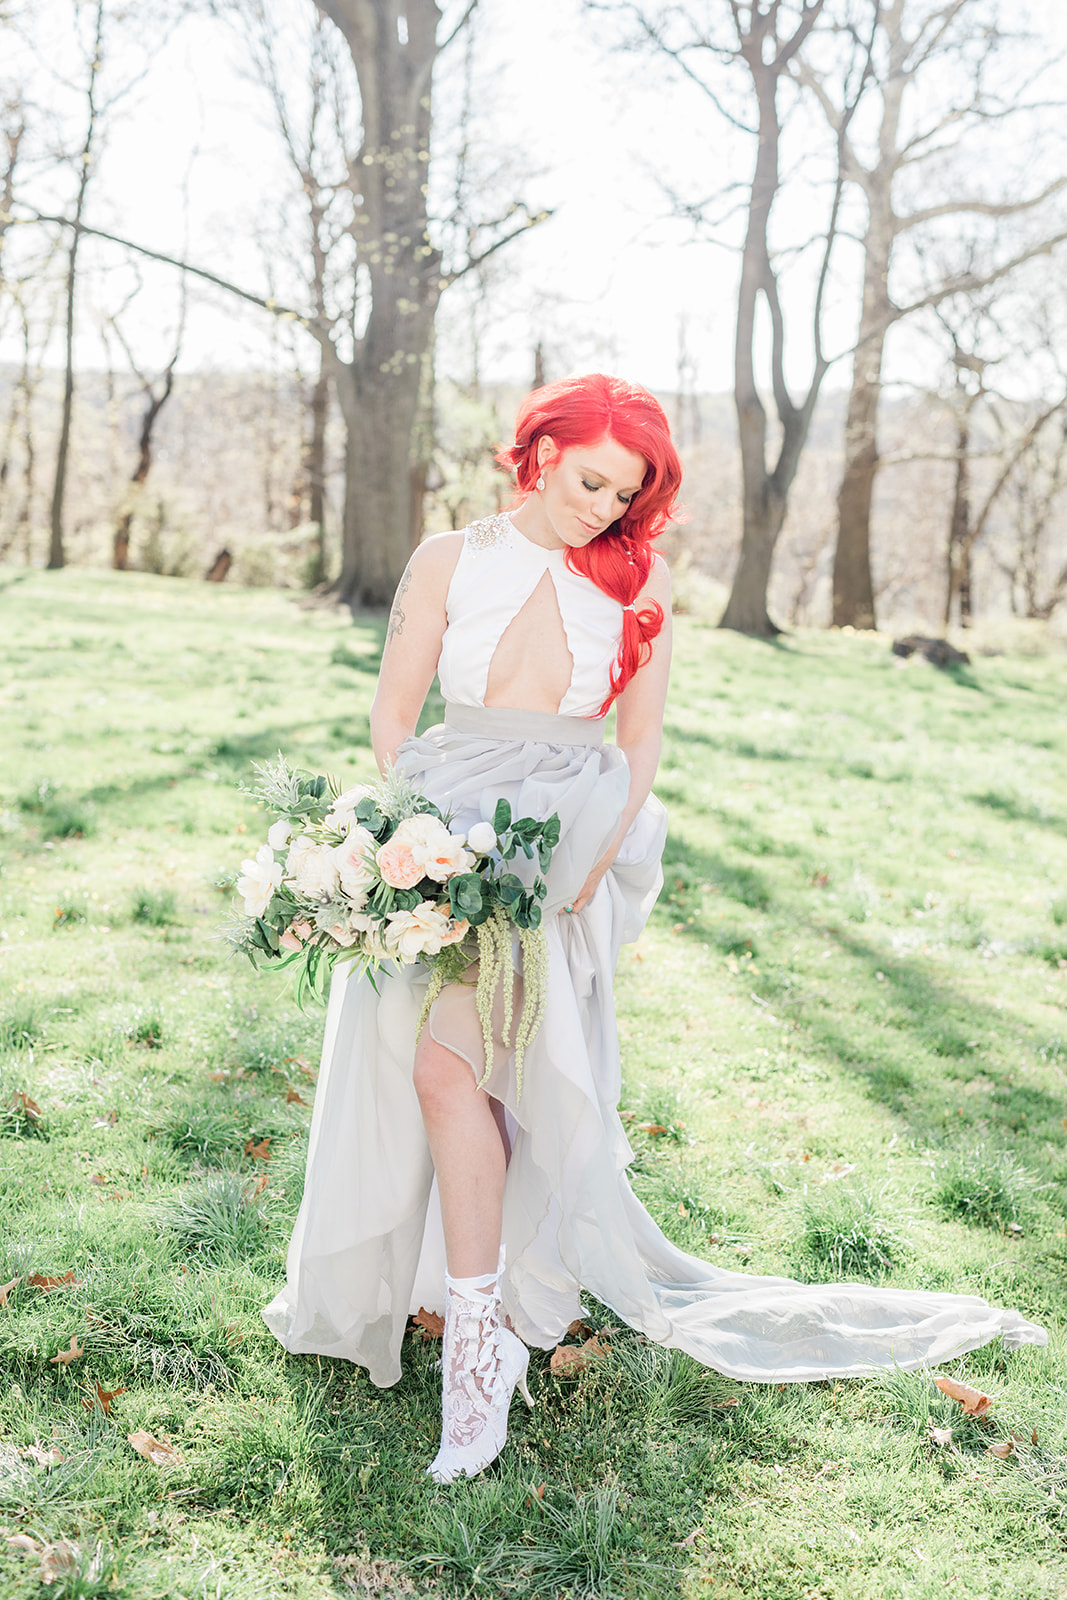 Little Mermaid Wedding Inspiration Lace Ankle Booties